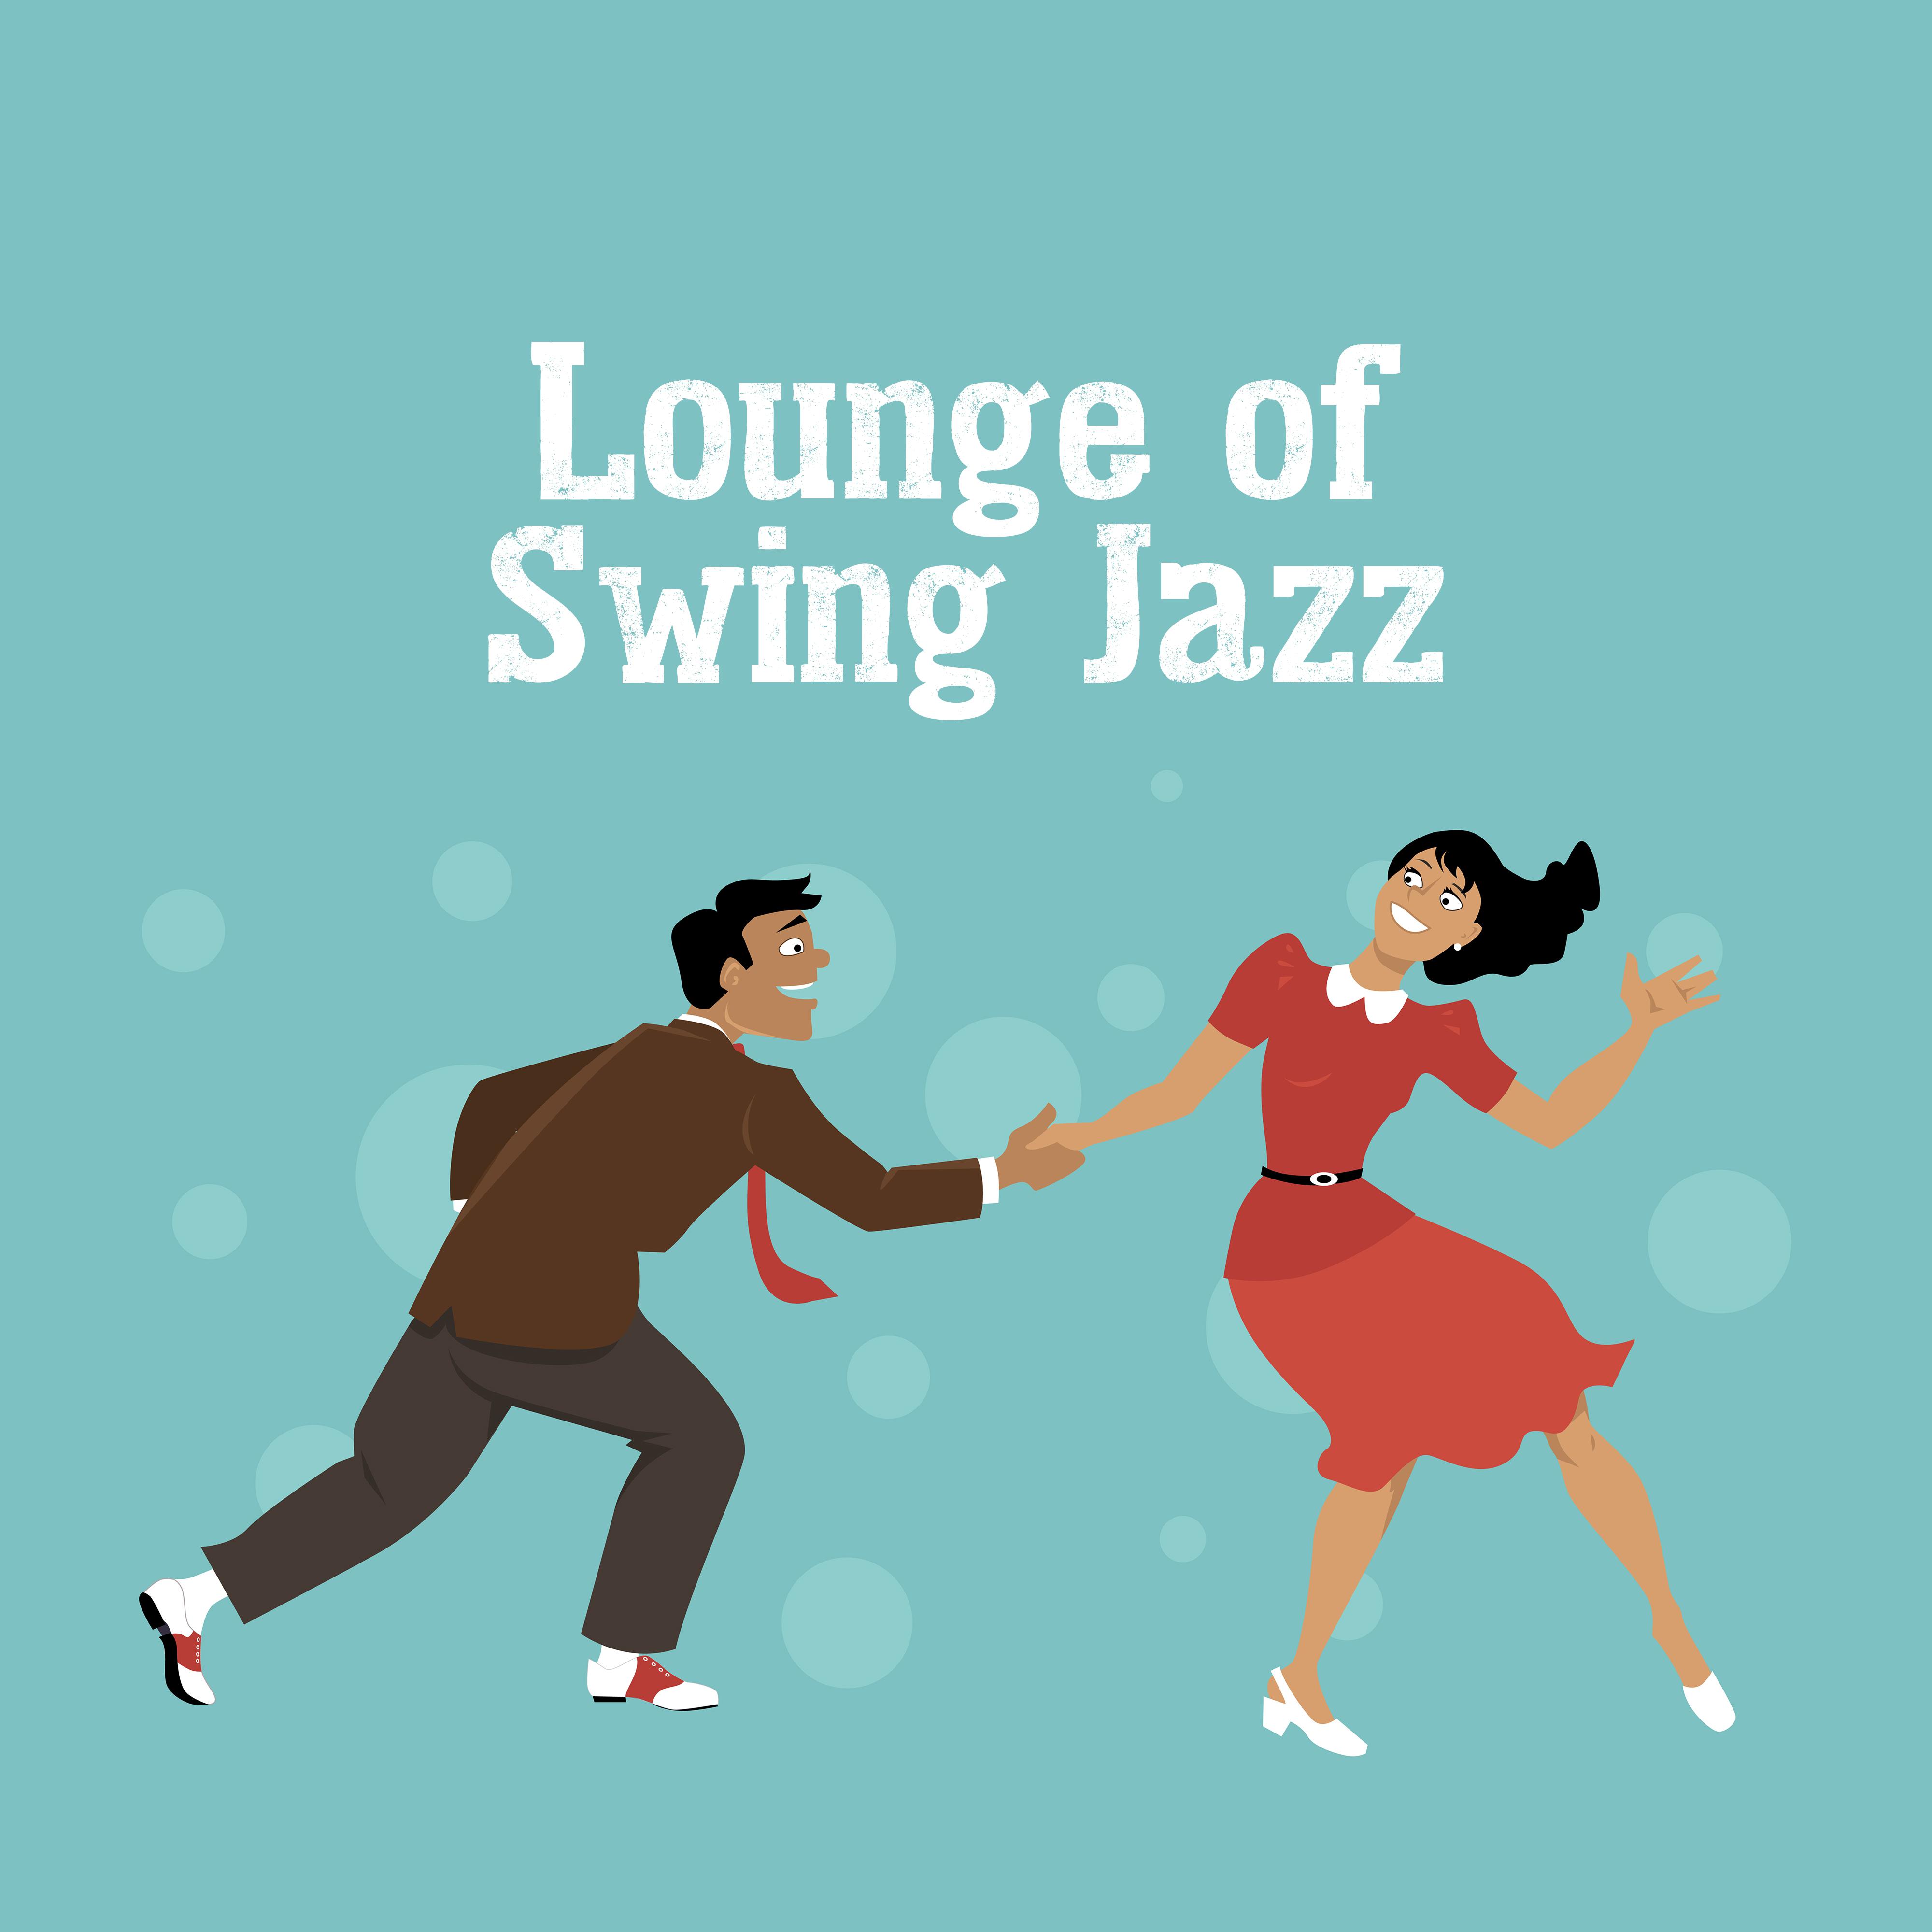 Lounge of Swing Jazz: 2019 Istrumental Smooth Jazz Music Selection, Vintage Dancing Songs, Happy Melodies Played on Piano, Contrabass, Trumpet & More